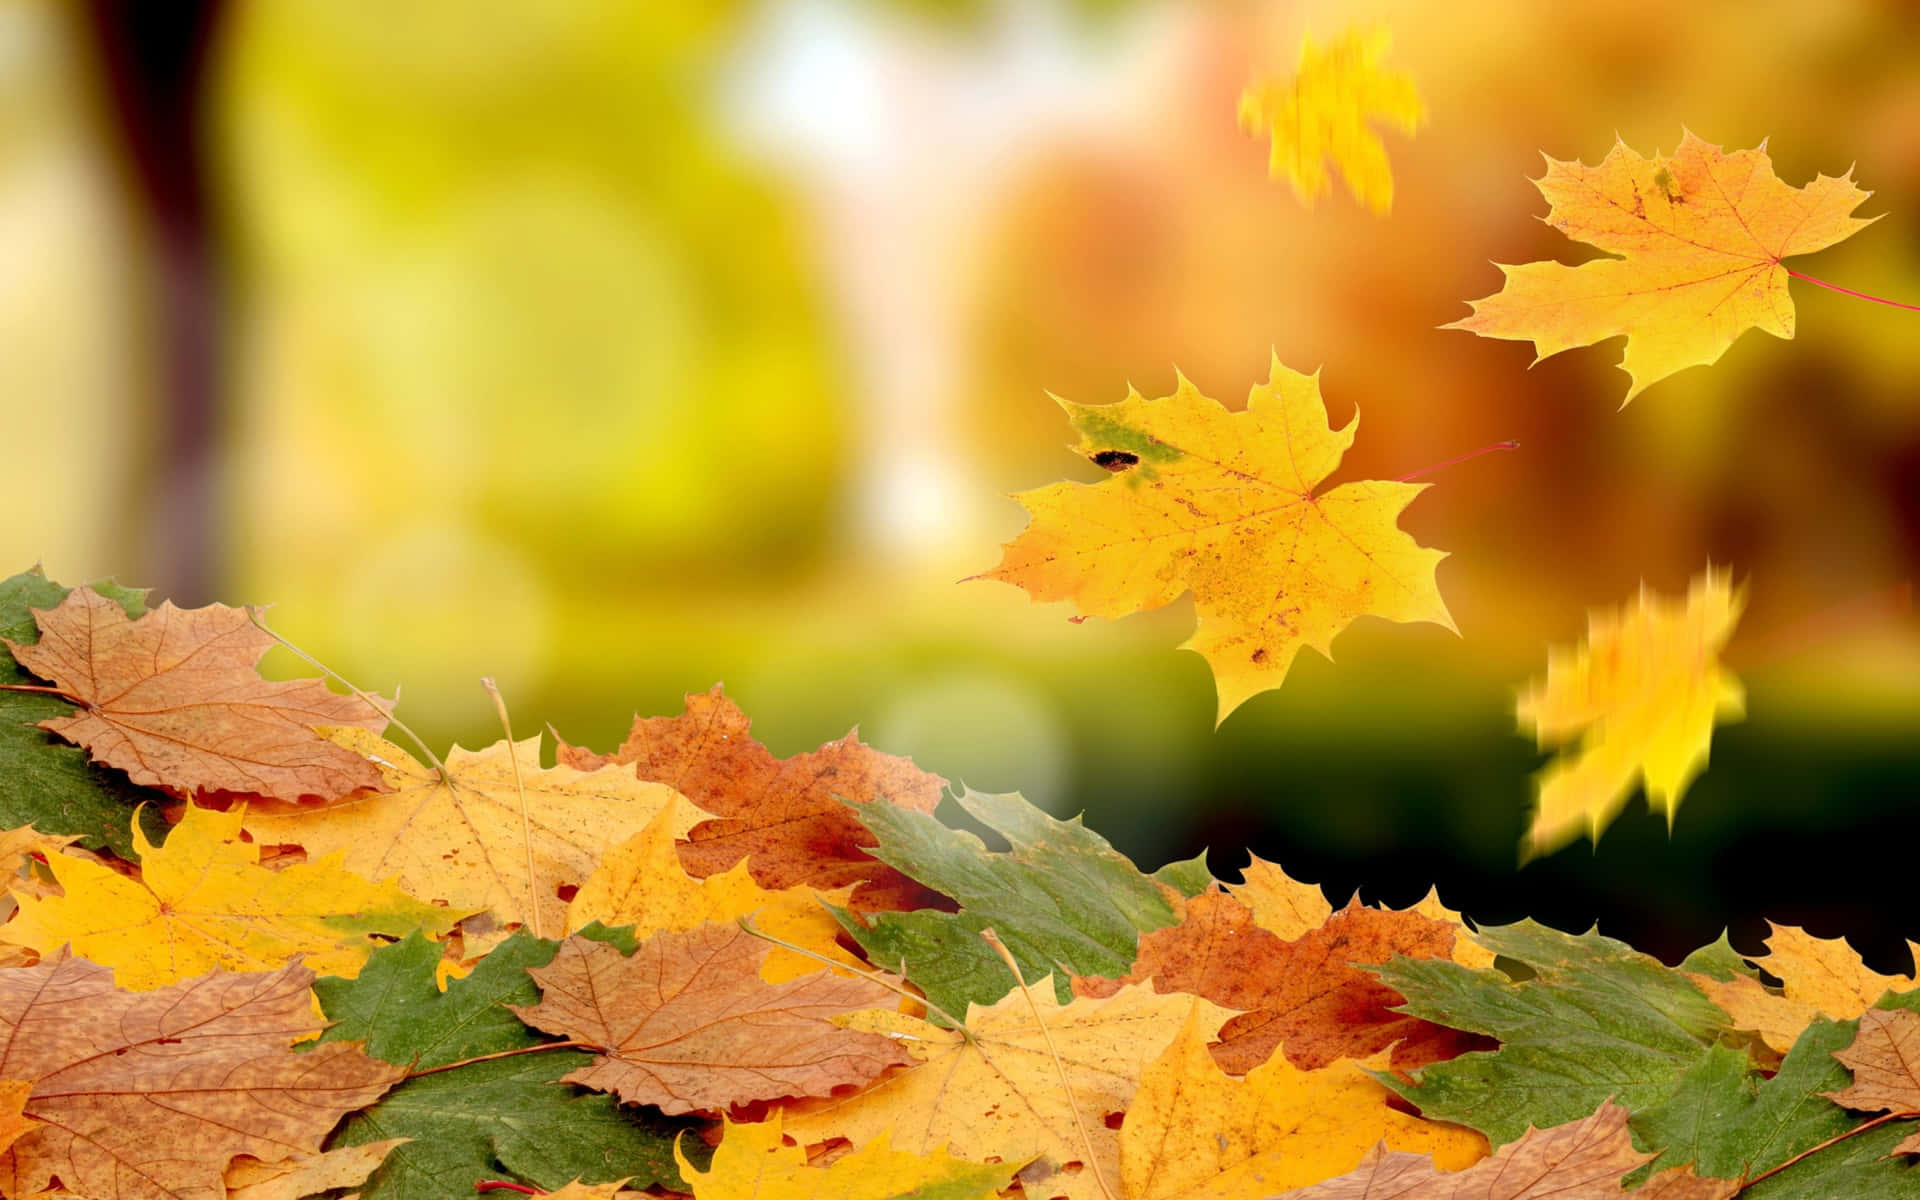 Enjoy the beauty of the simple autumn. Wallpaper